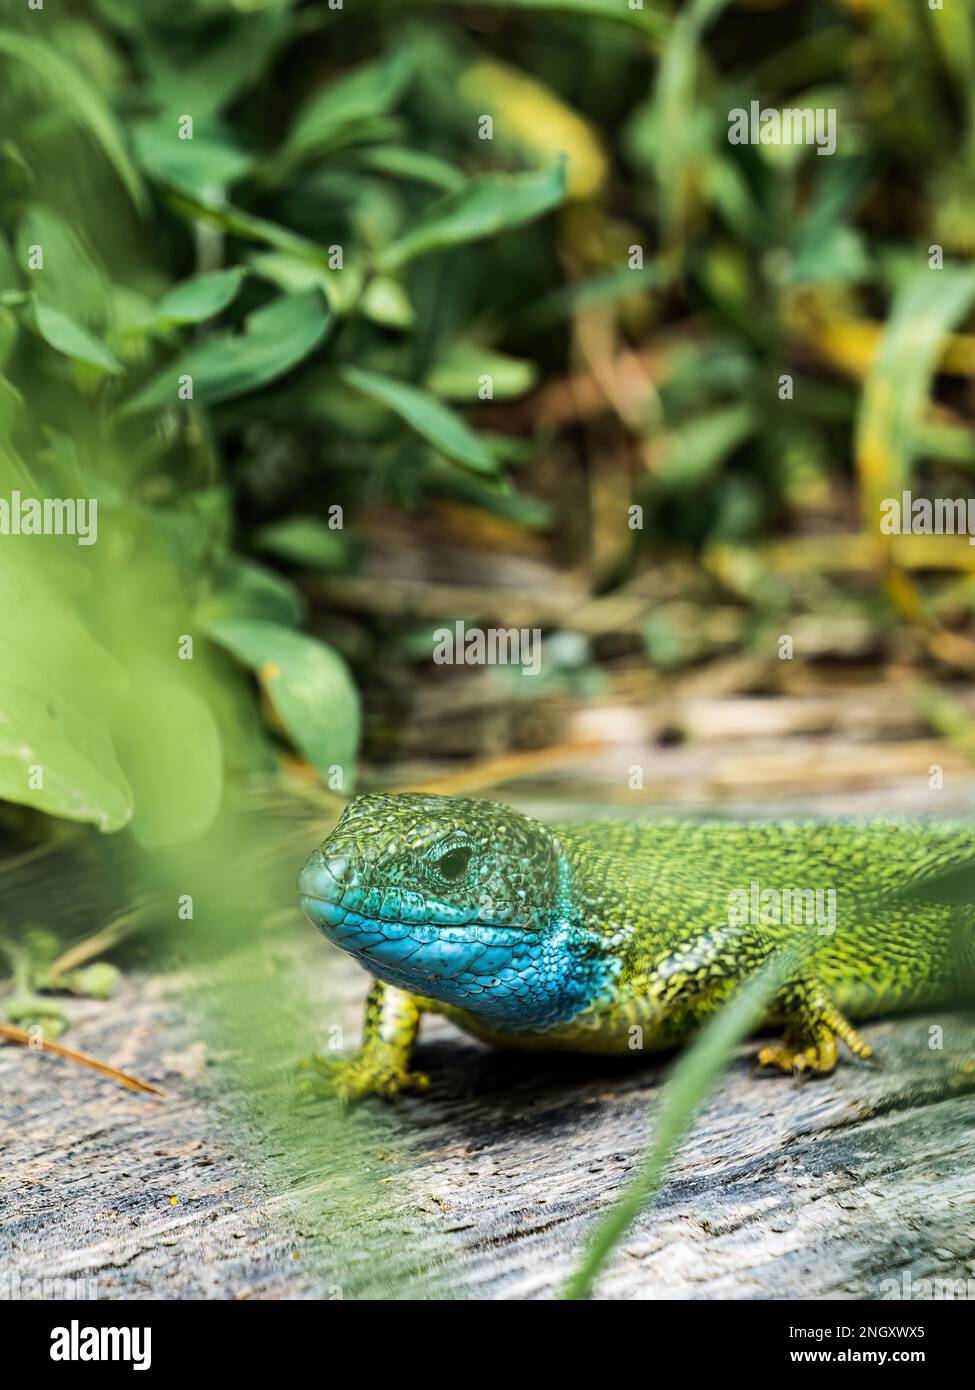 European green lizard (Lacerta viridis) between grass from the front during summer in Hungary Stock Photo